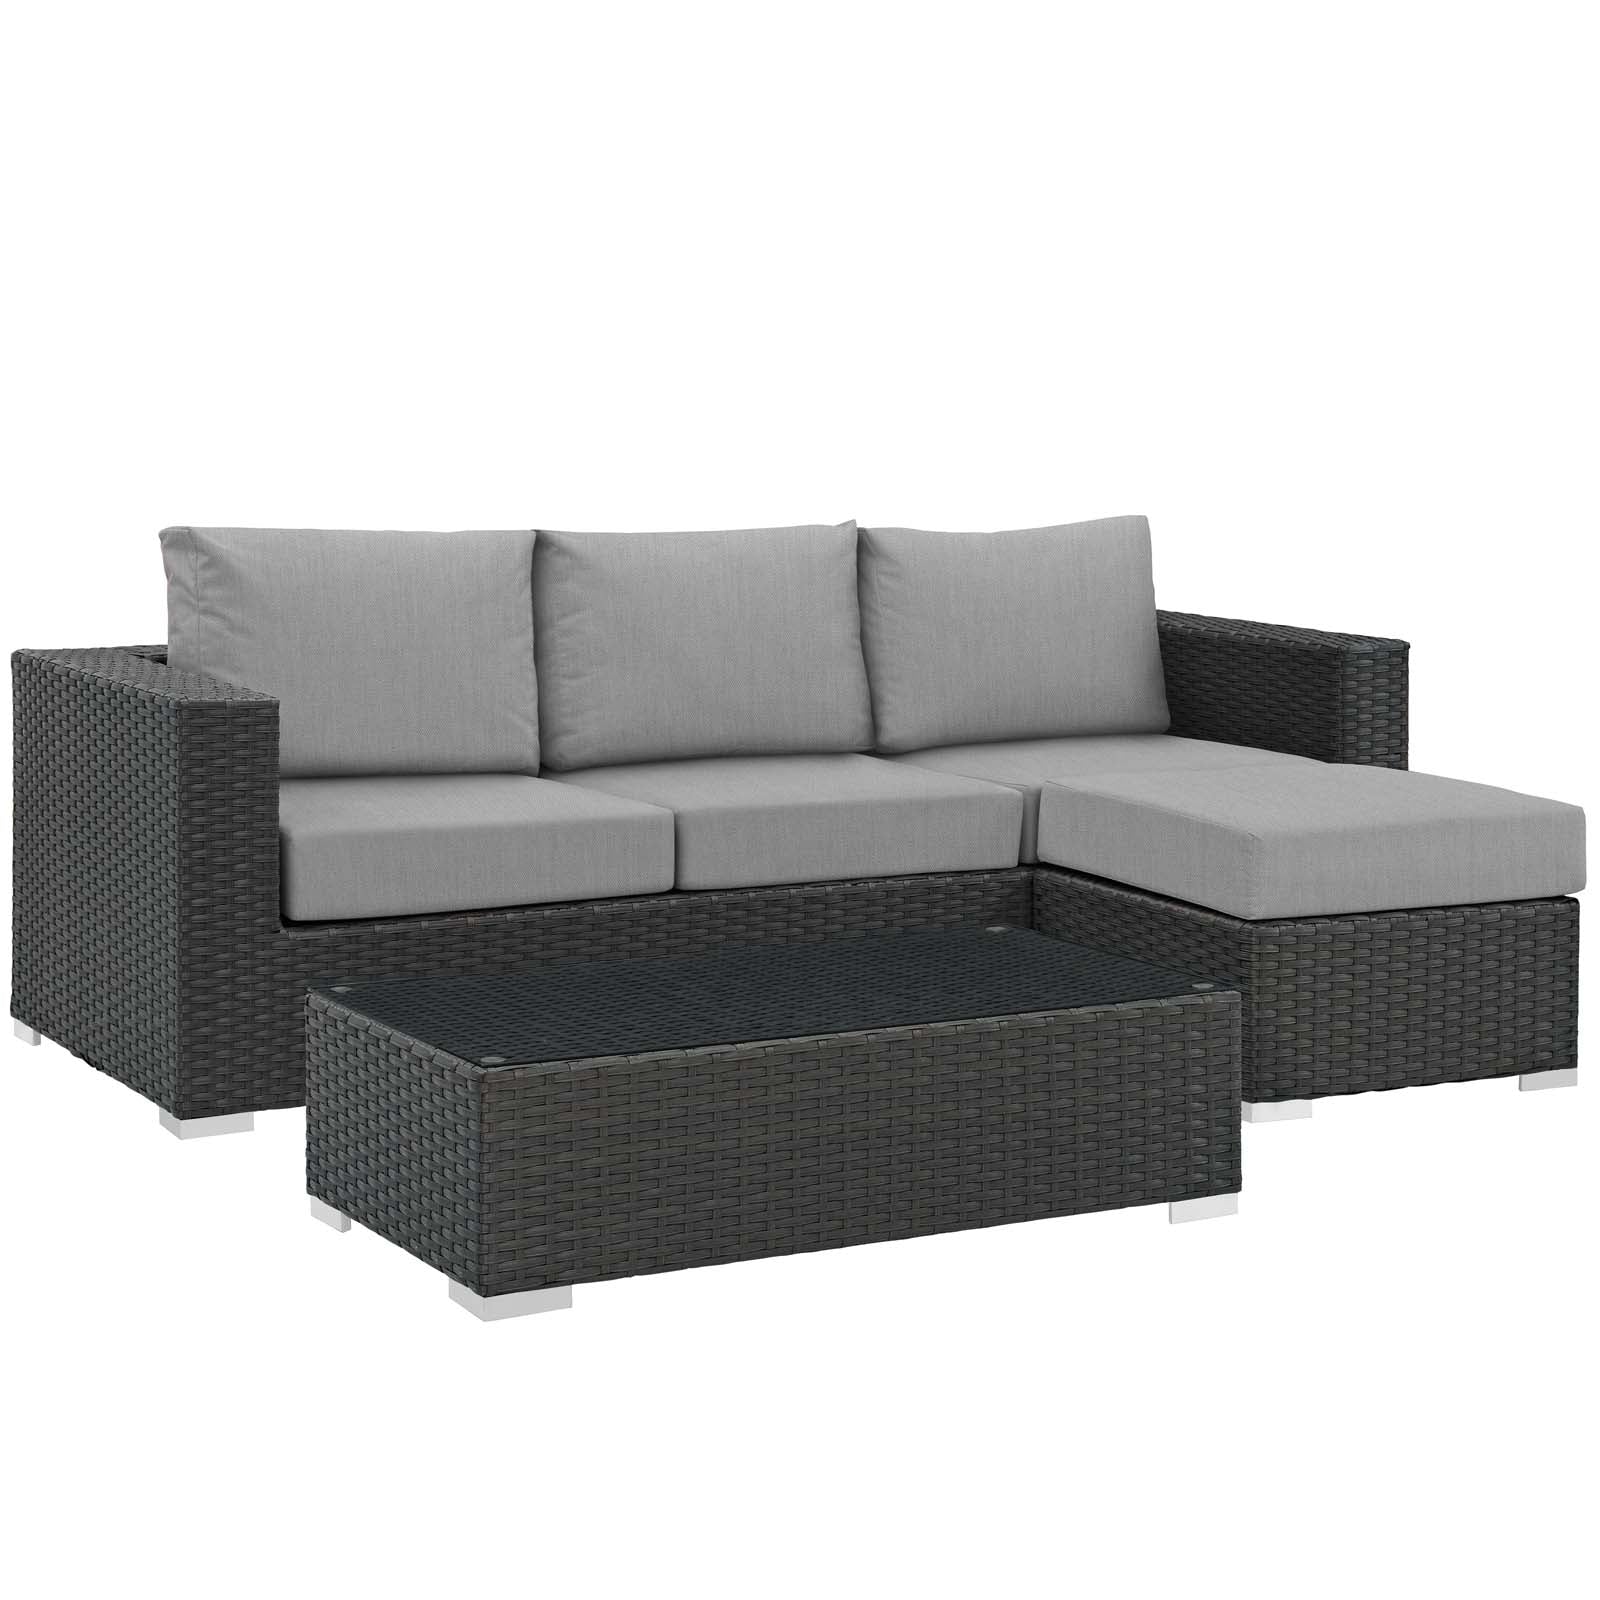 Sojourn 3 Piece Outdoor Patio Sectional Set Canvas Gray